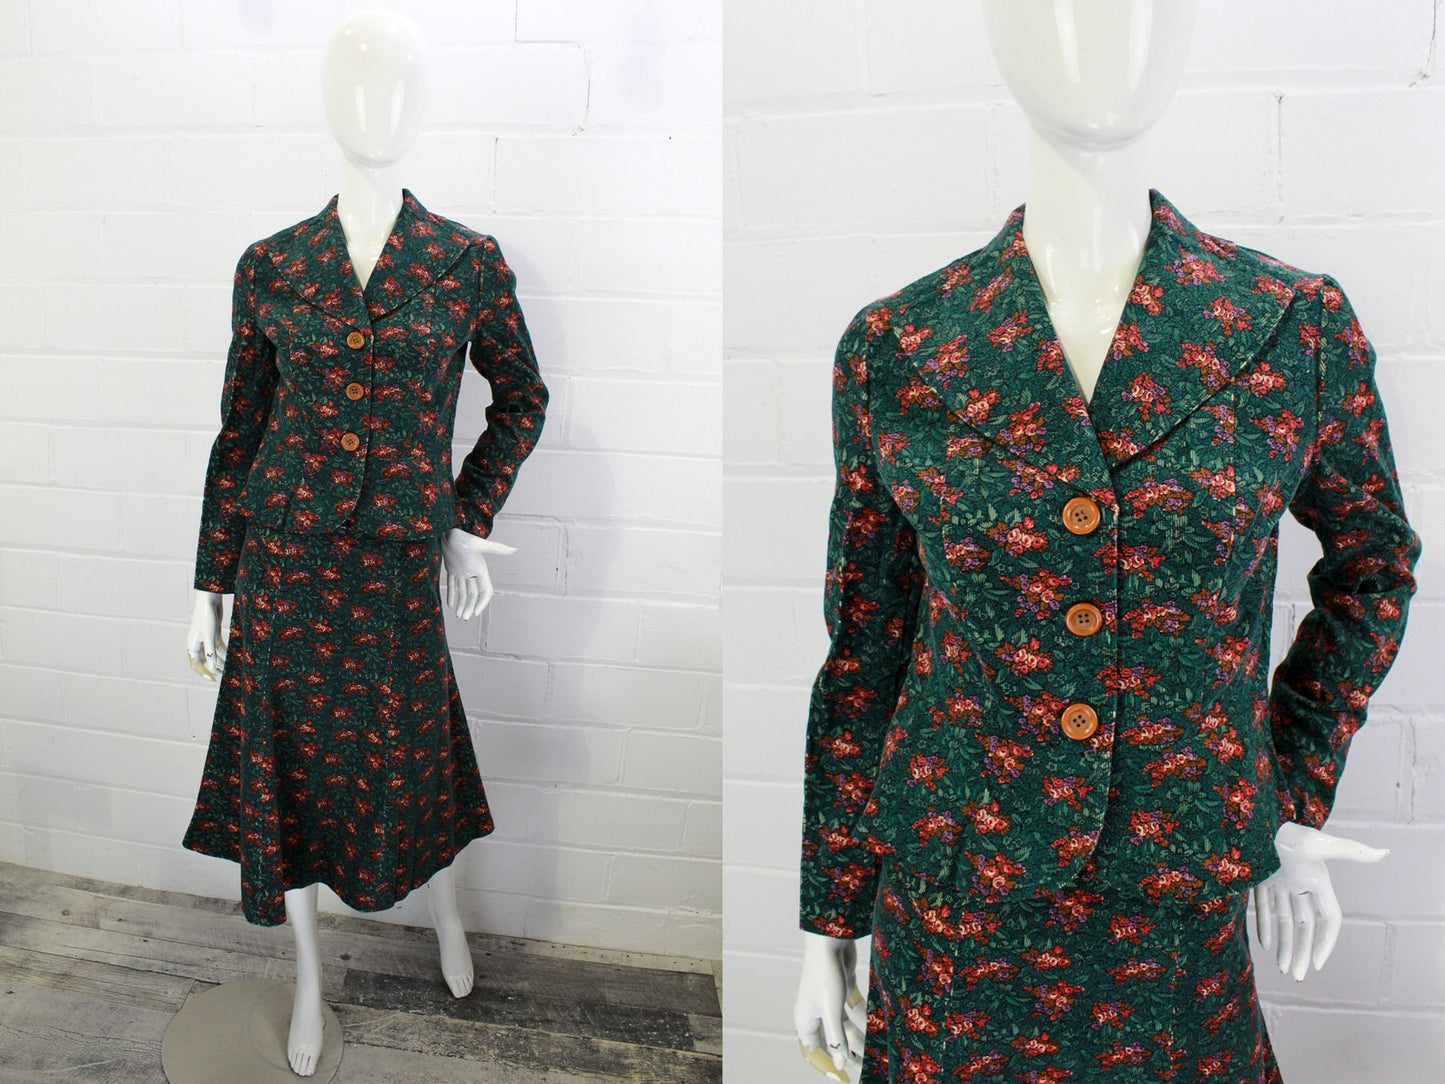 Vintage 1970s Corduroy Skirt Suit, Blazer and A-line Skirt, Teal Floral Print Corduroy, Deadstock, Small